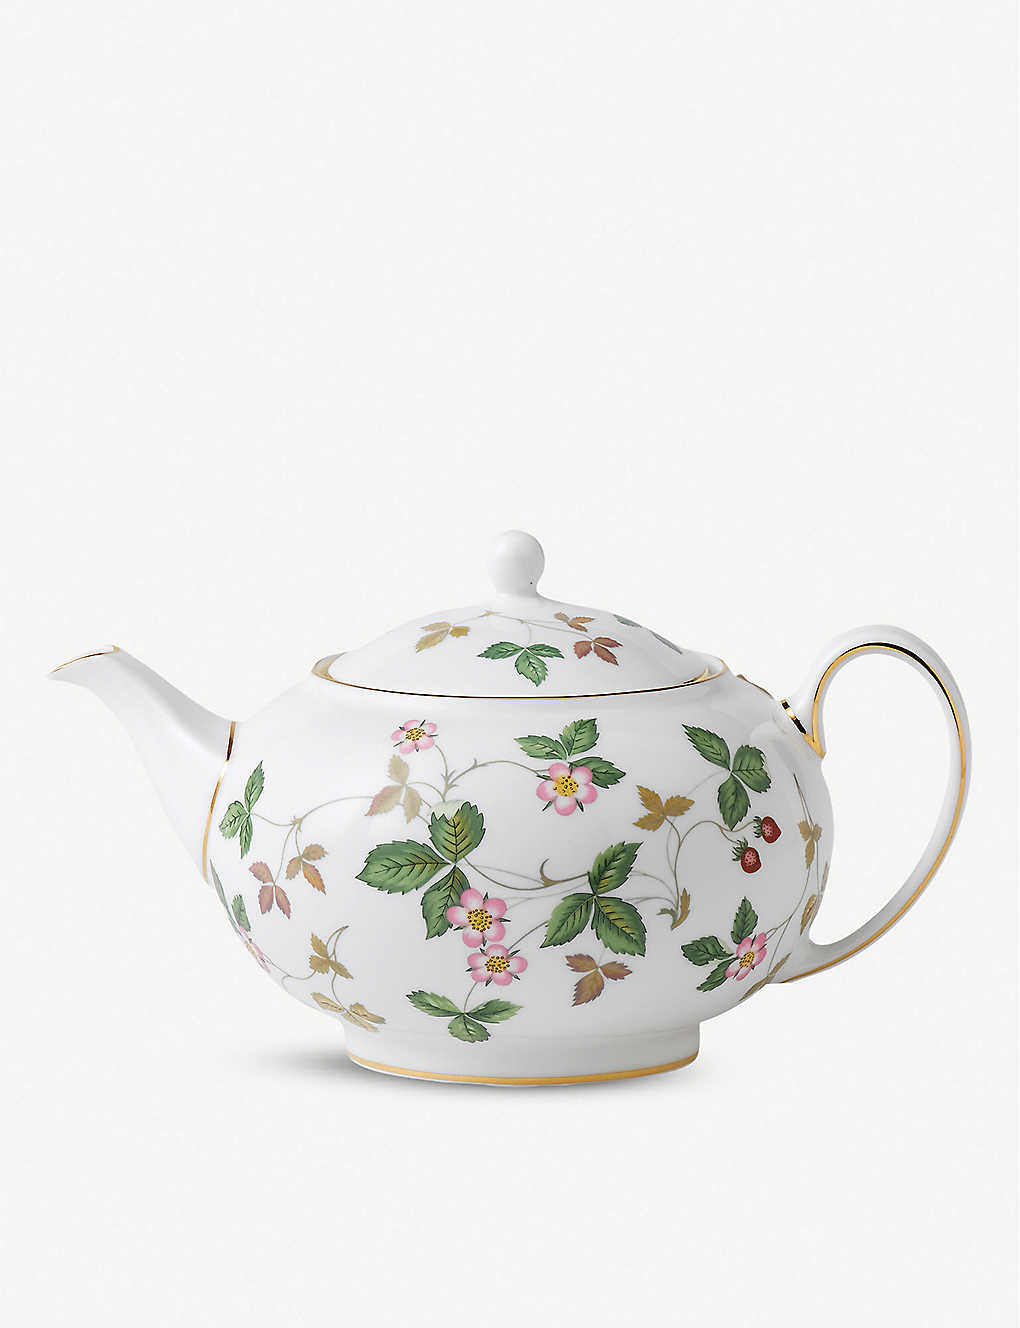 Wedgwood Wild Strawberry Teapot With $35 Credit